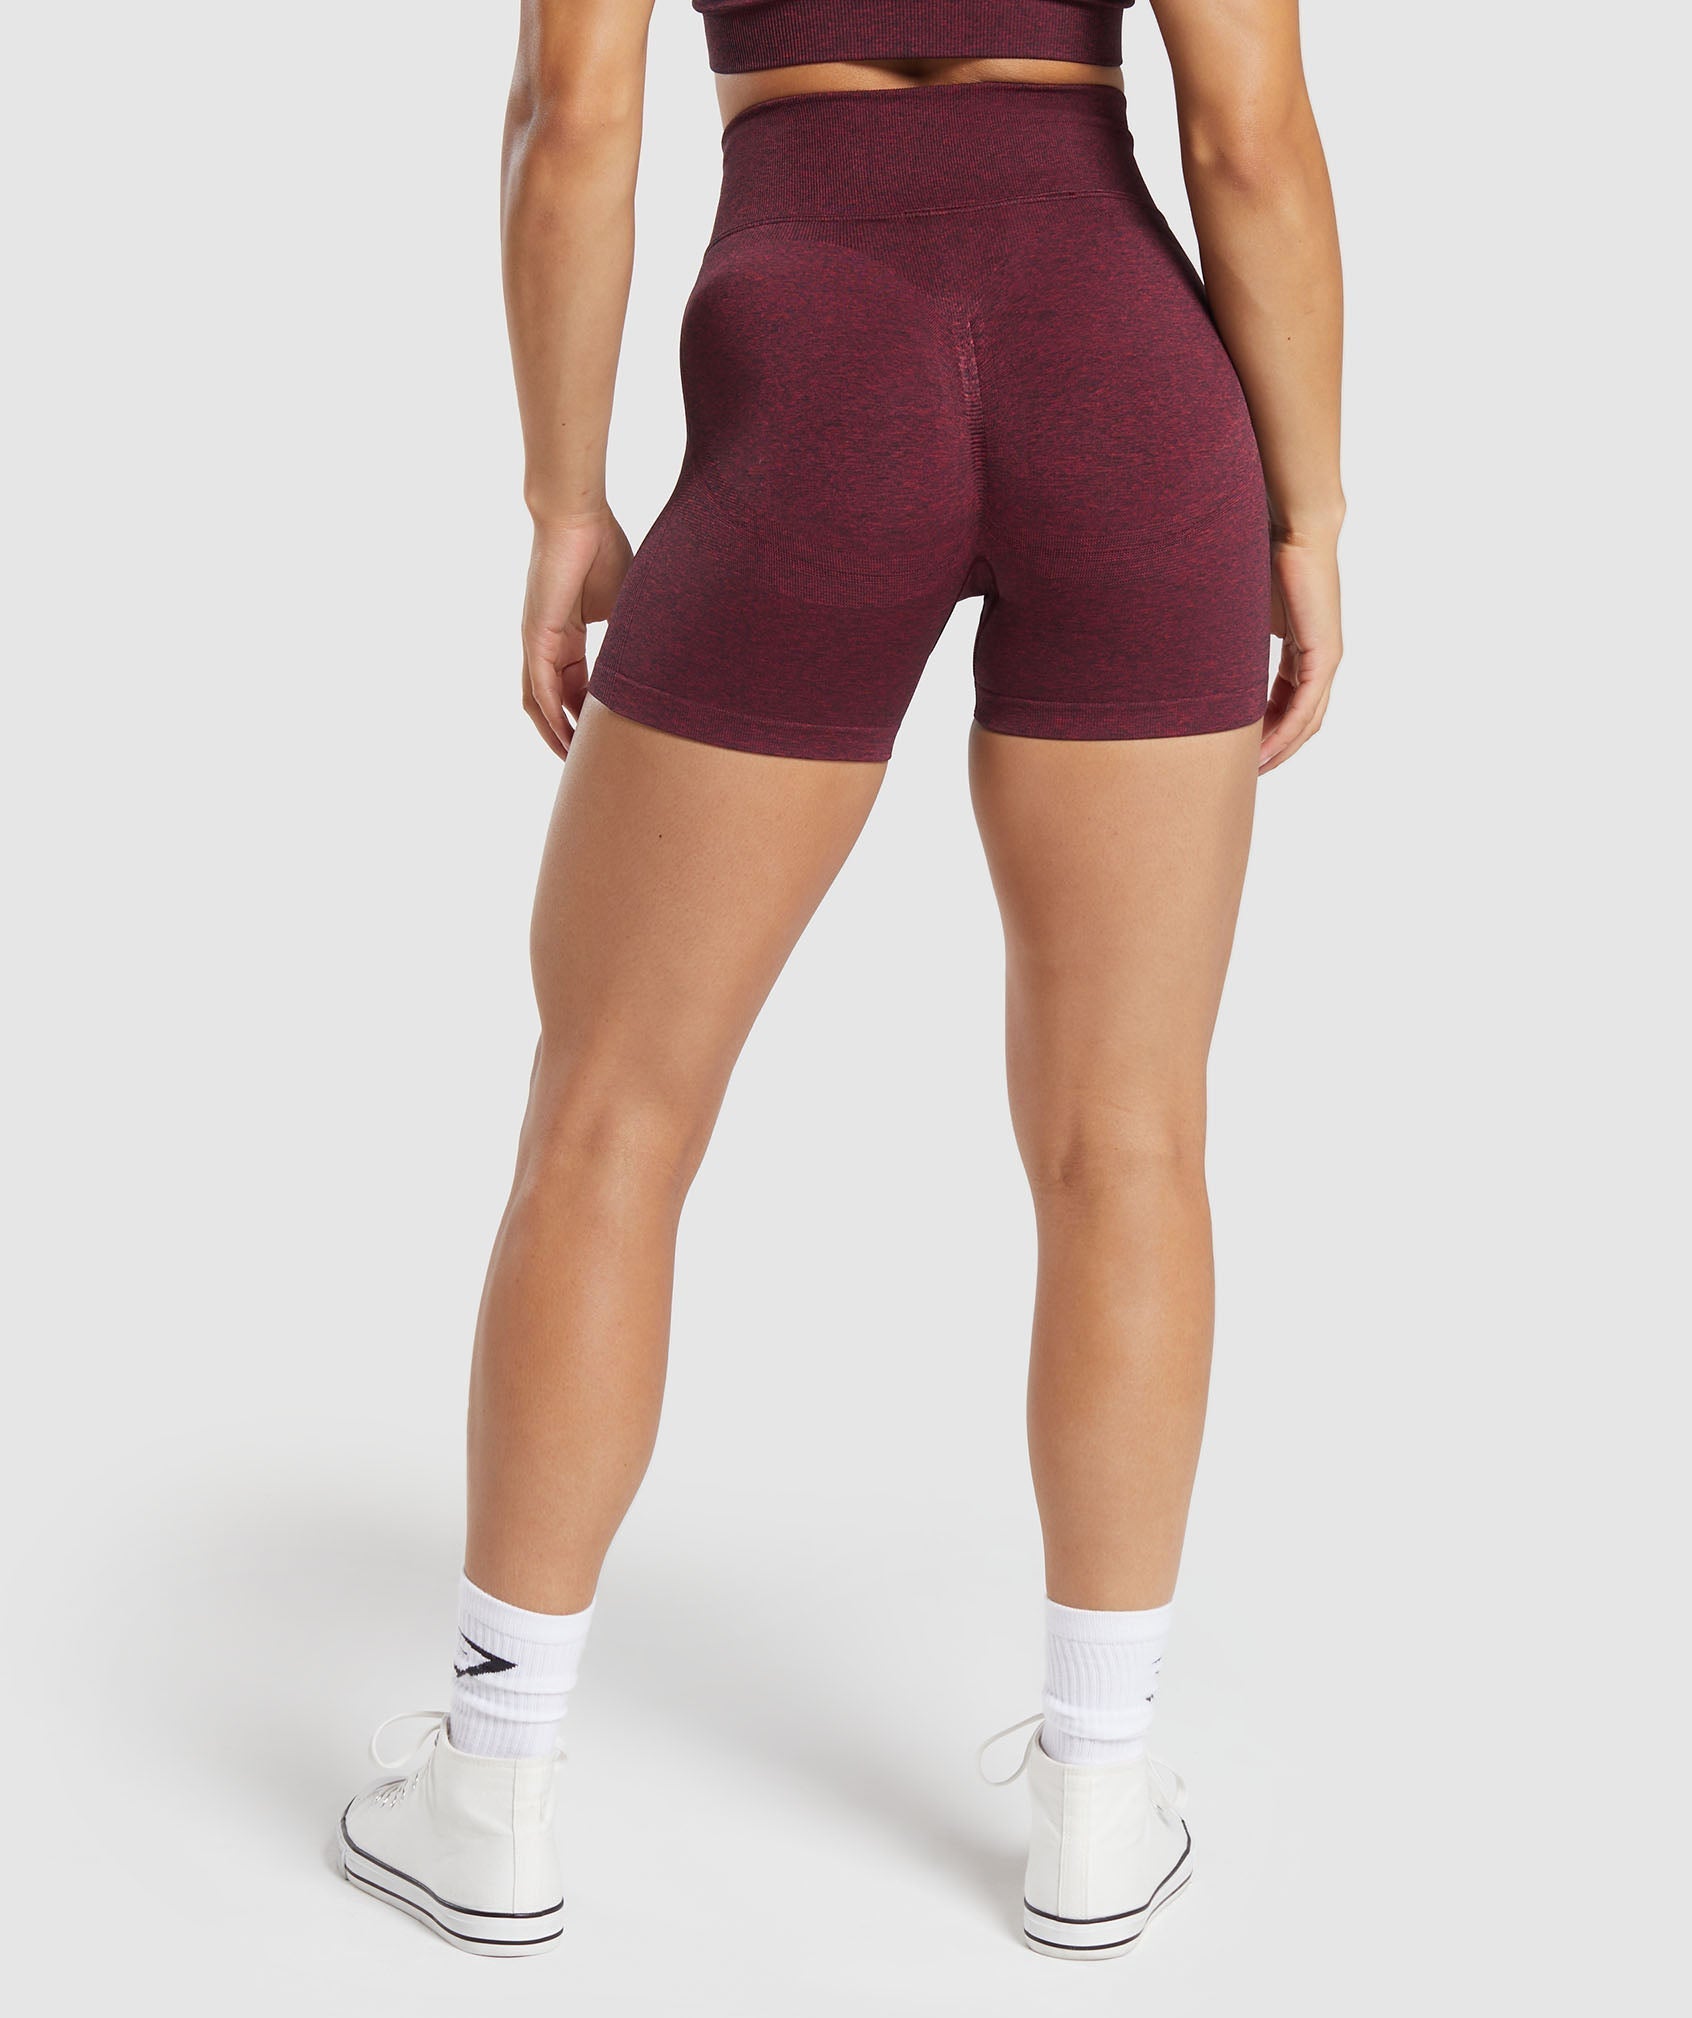 Lift Contour Seamless Shorts in Vintage Pink/Black Marl - view 5